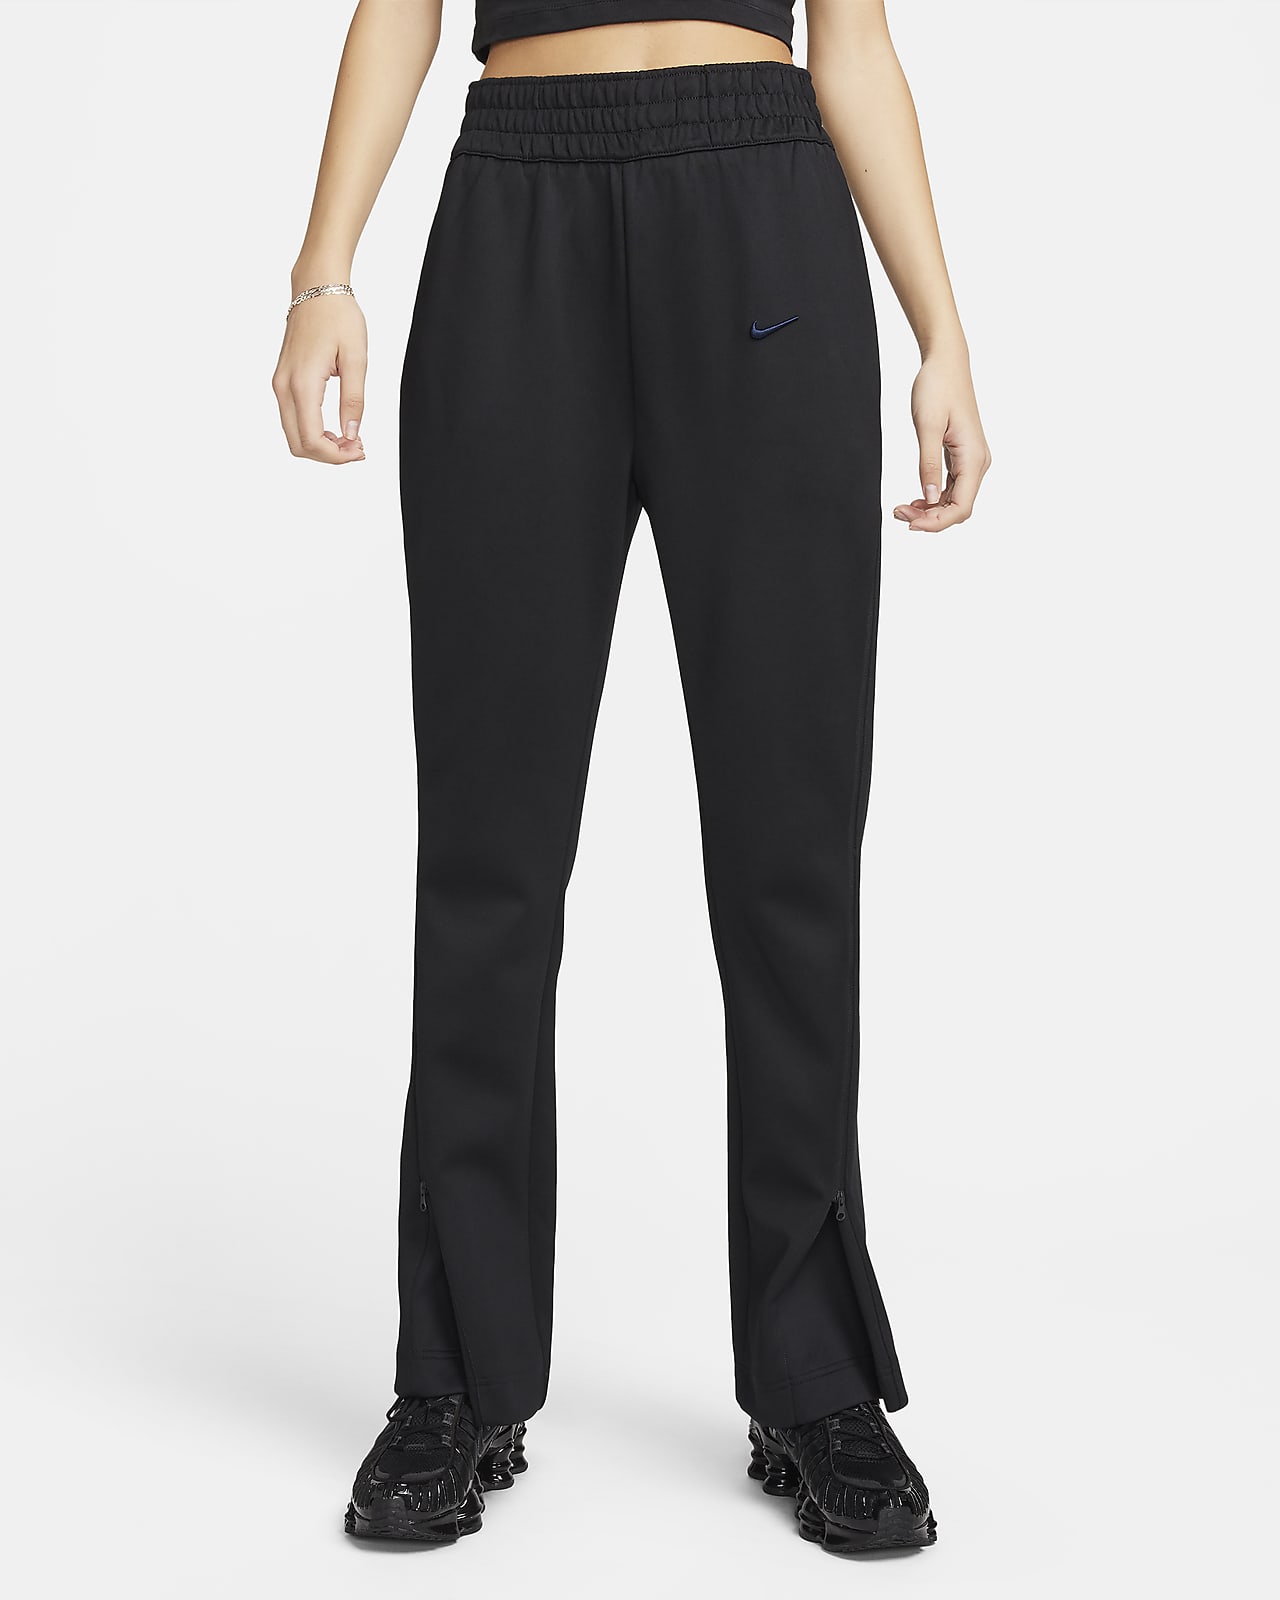 Nike Court Size M $110 Dri-FIT Women's Ankle Zipper Tennis Pants SOLD OUT  Style